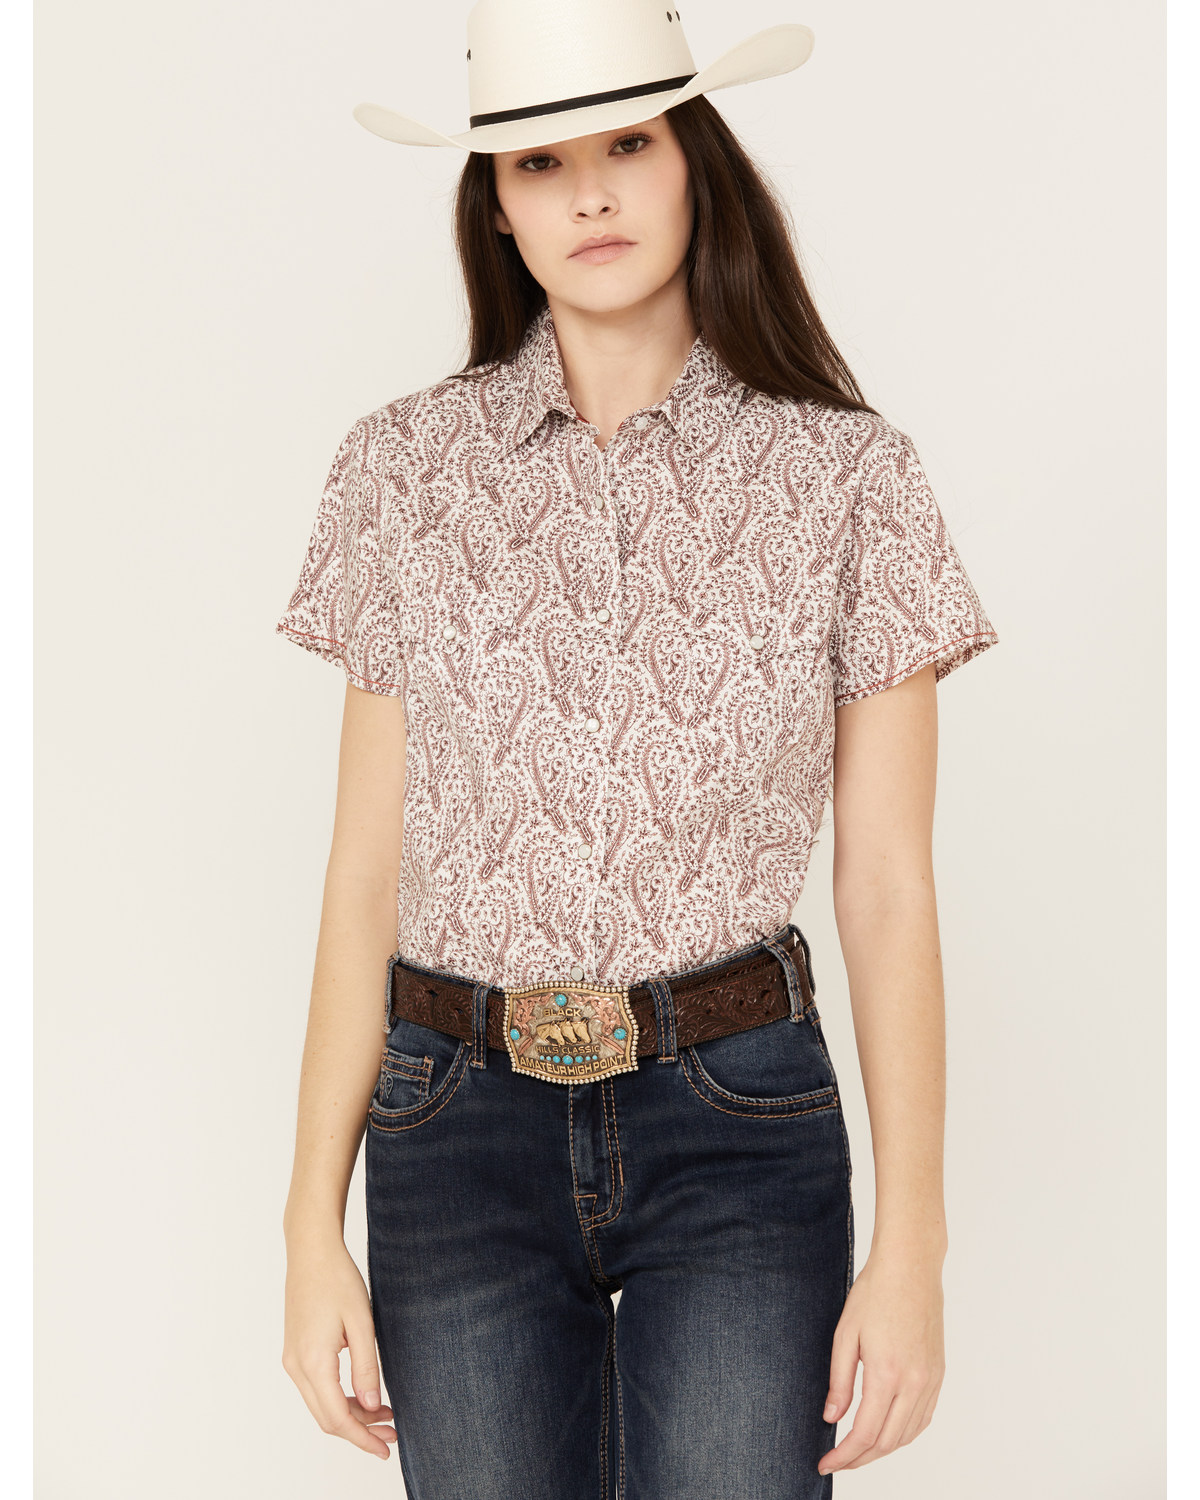 Rough Stock by Panhandle Women's Paisley Print Stretch Short Sleeve Western Snap Shirt